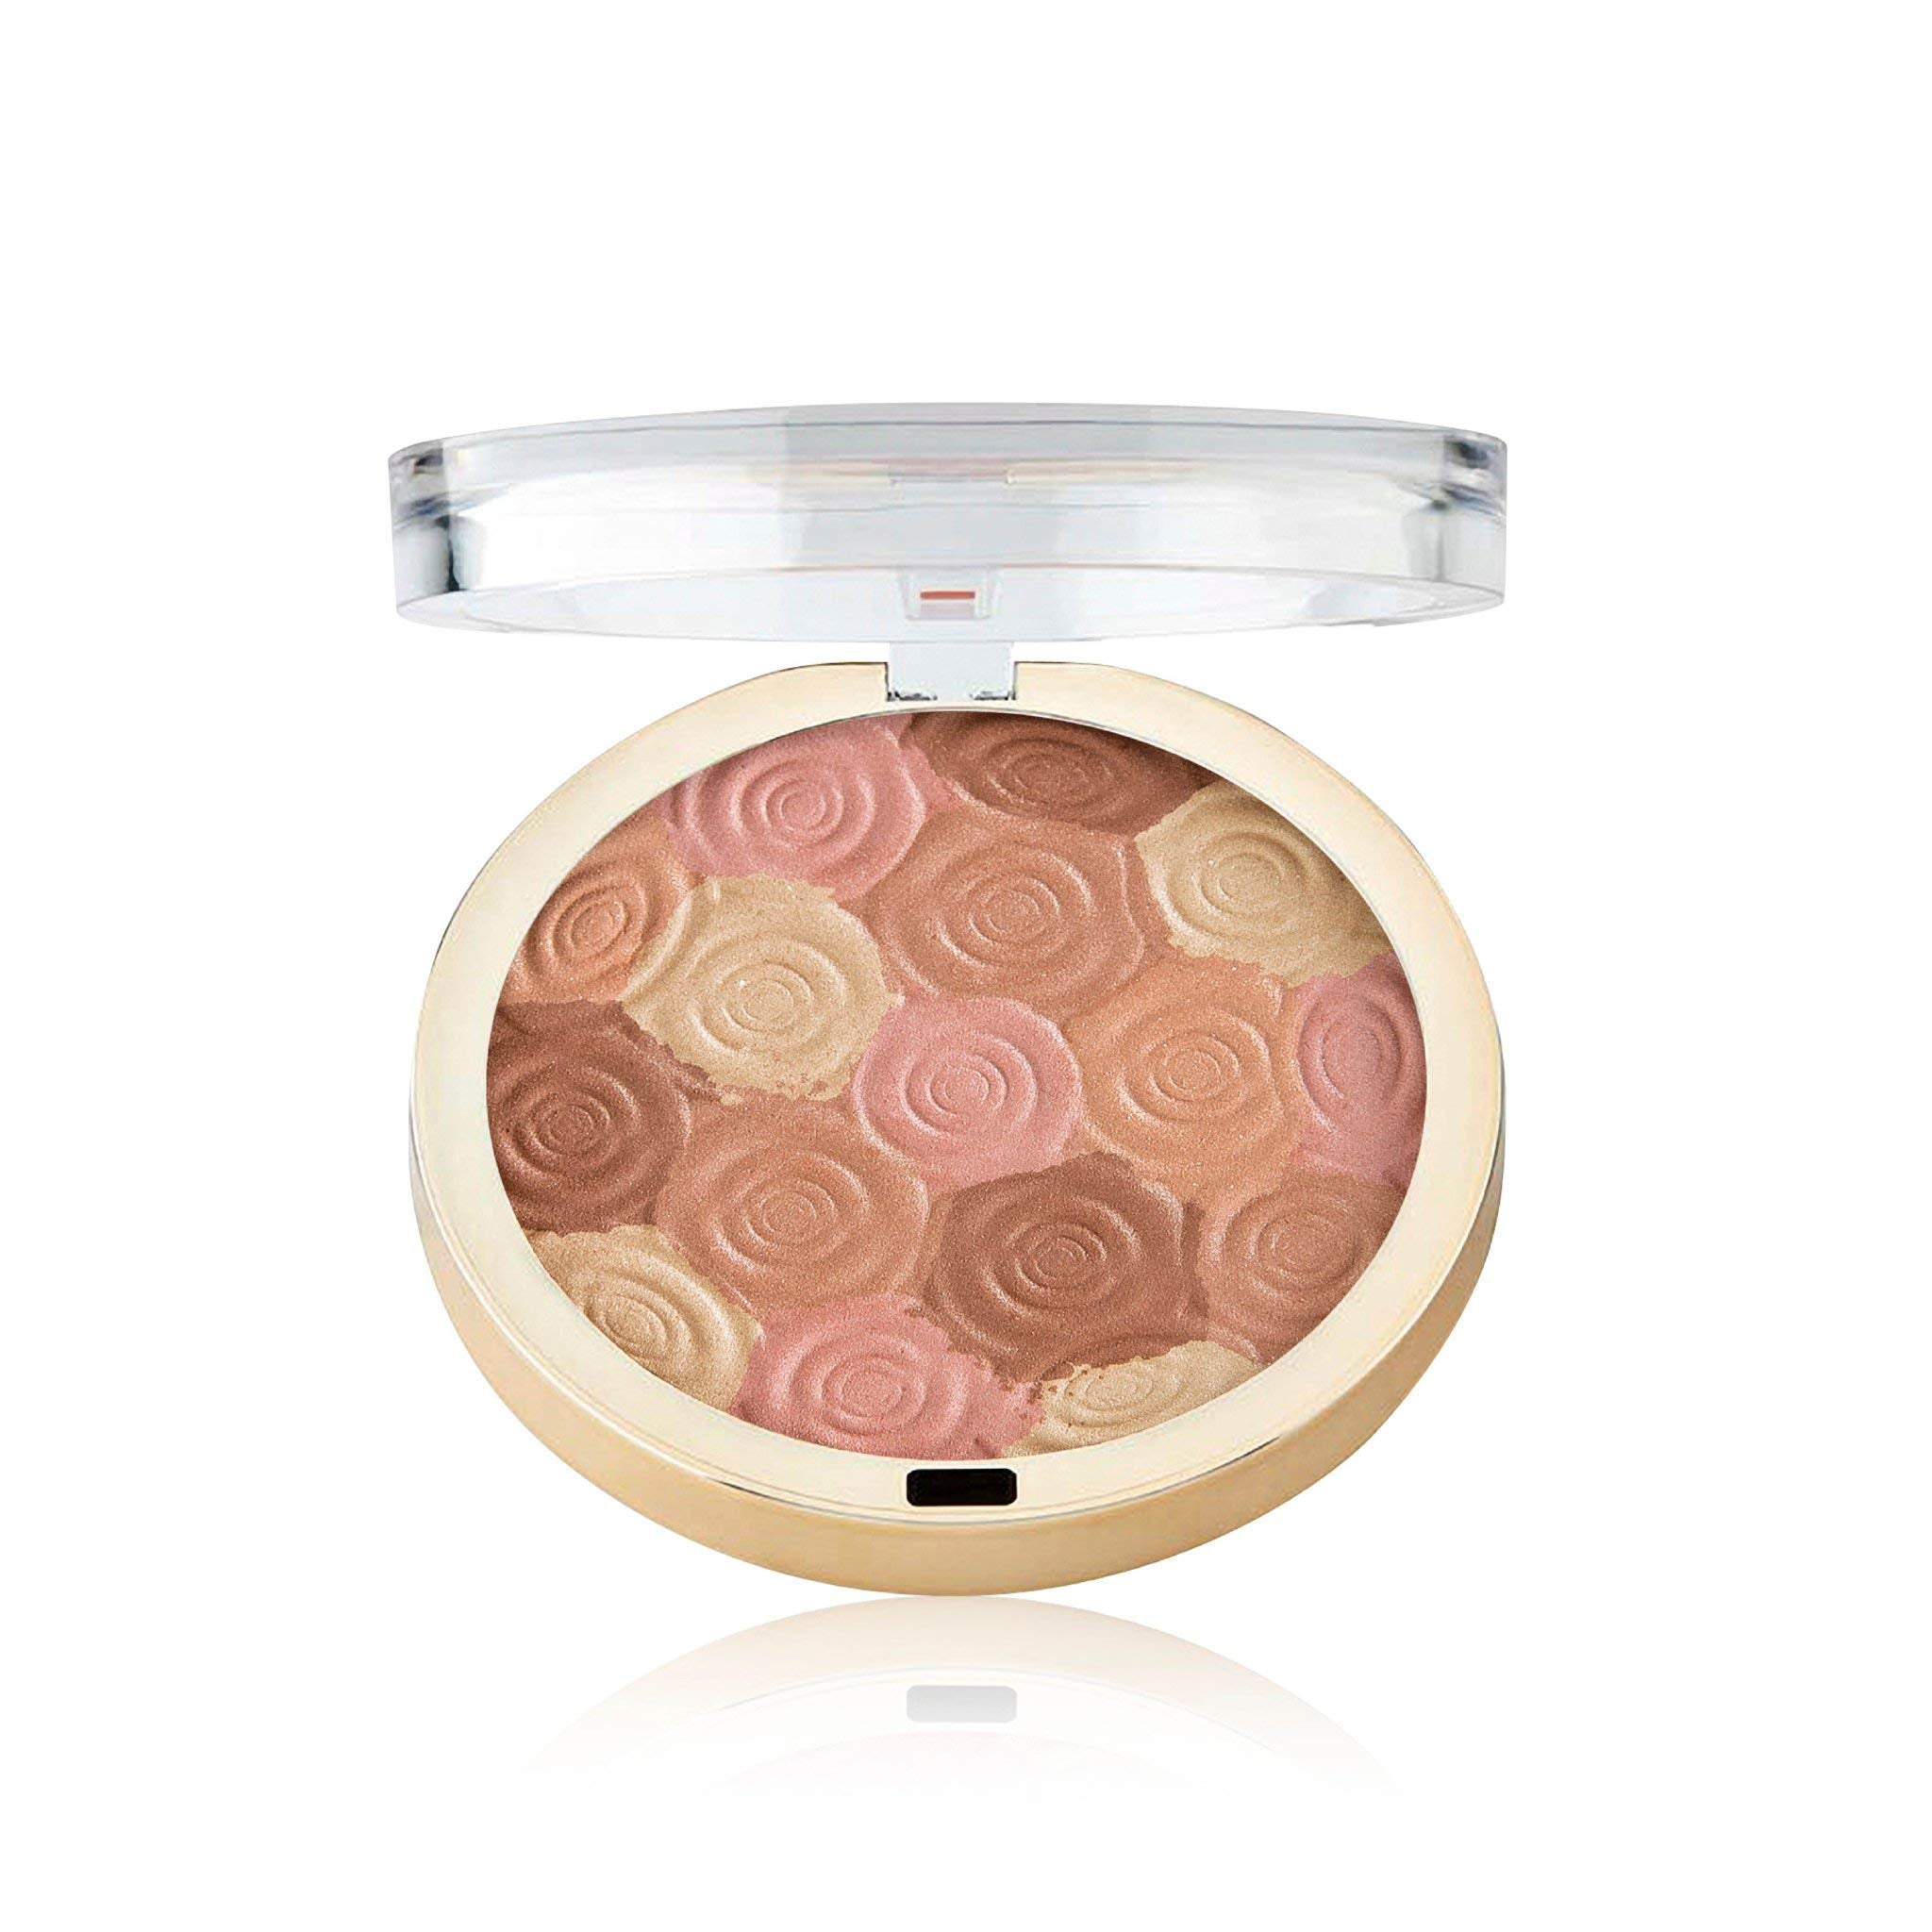 Milani Illuminating Face Powder - Hermosa Rose (0.35 Ounce) Cruelty-Free Highlighter, Blush & Bronzer in One Compact to Shape, Contour & Highlight